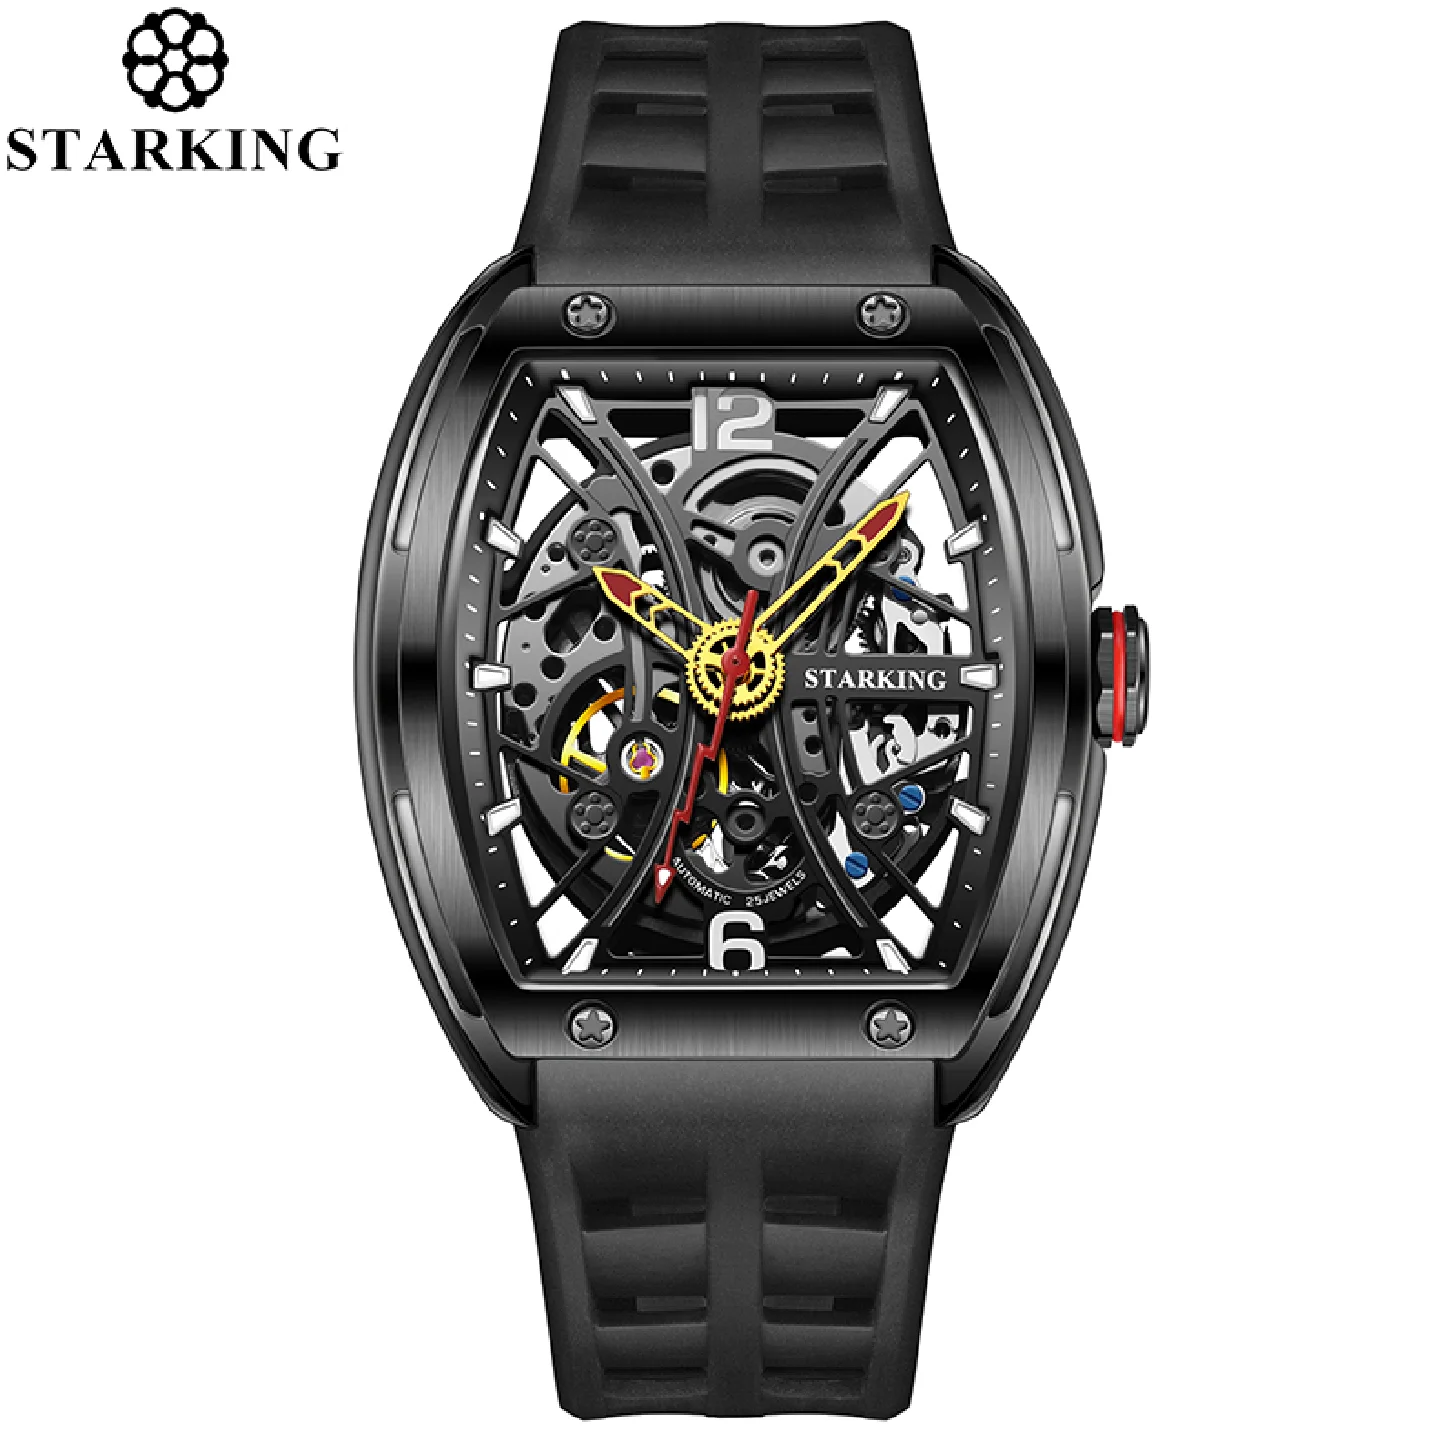 

STARKING Mechanical Watch For Men Top Brand New In Skeleton Watches Luminous Automatic Wristwatch Sports Silicone Clock Relogio